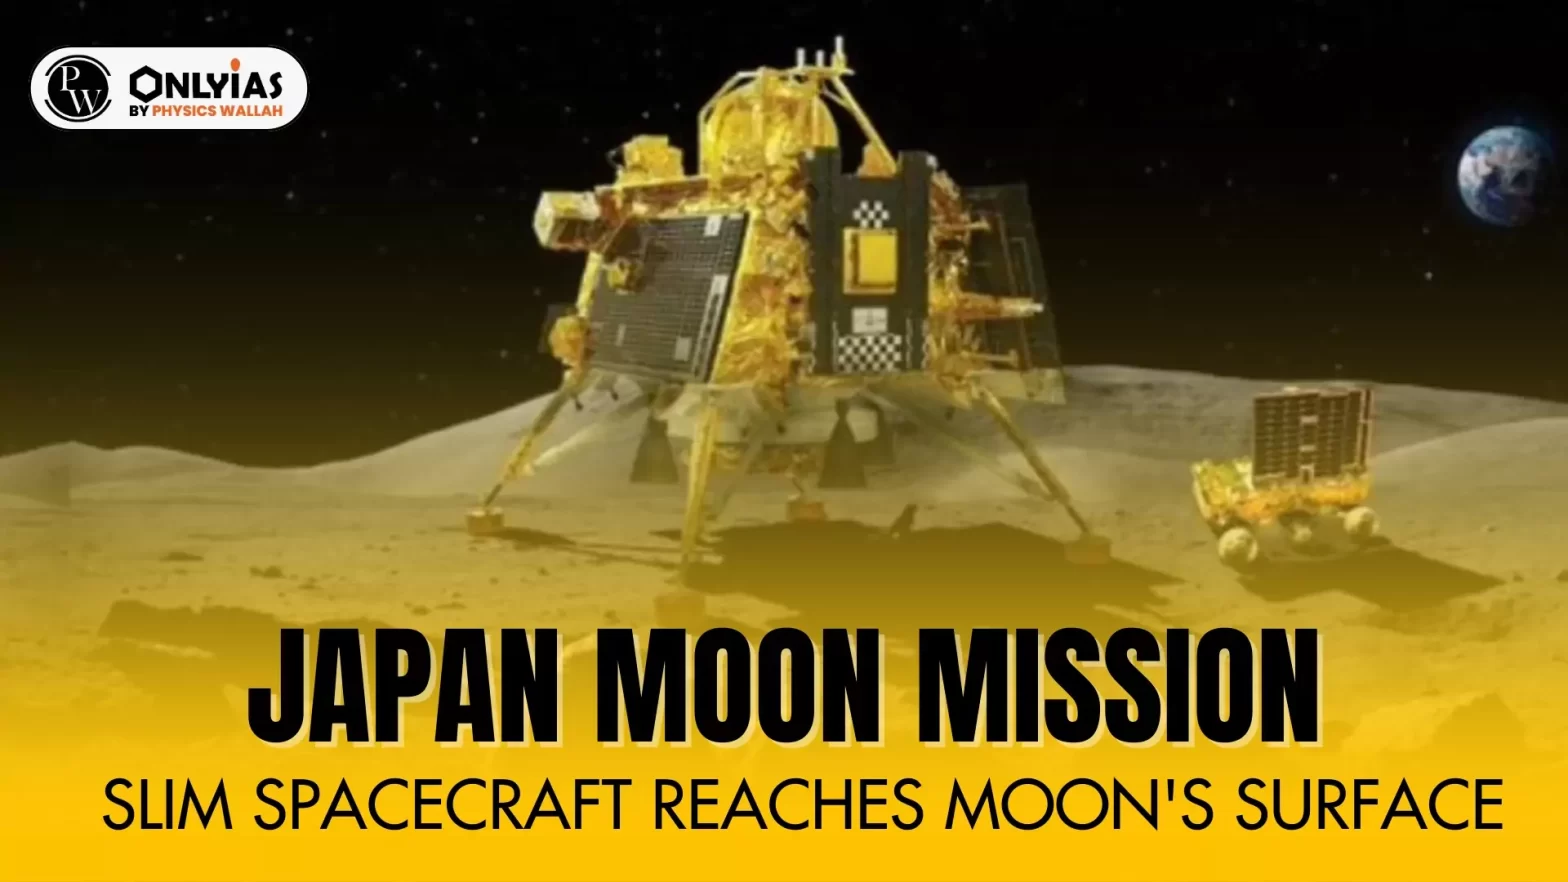 Japan Moon Mission SLIM Spacecraft Reaches Moon's Surface PWOnlyIAS